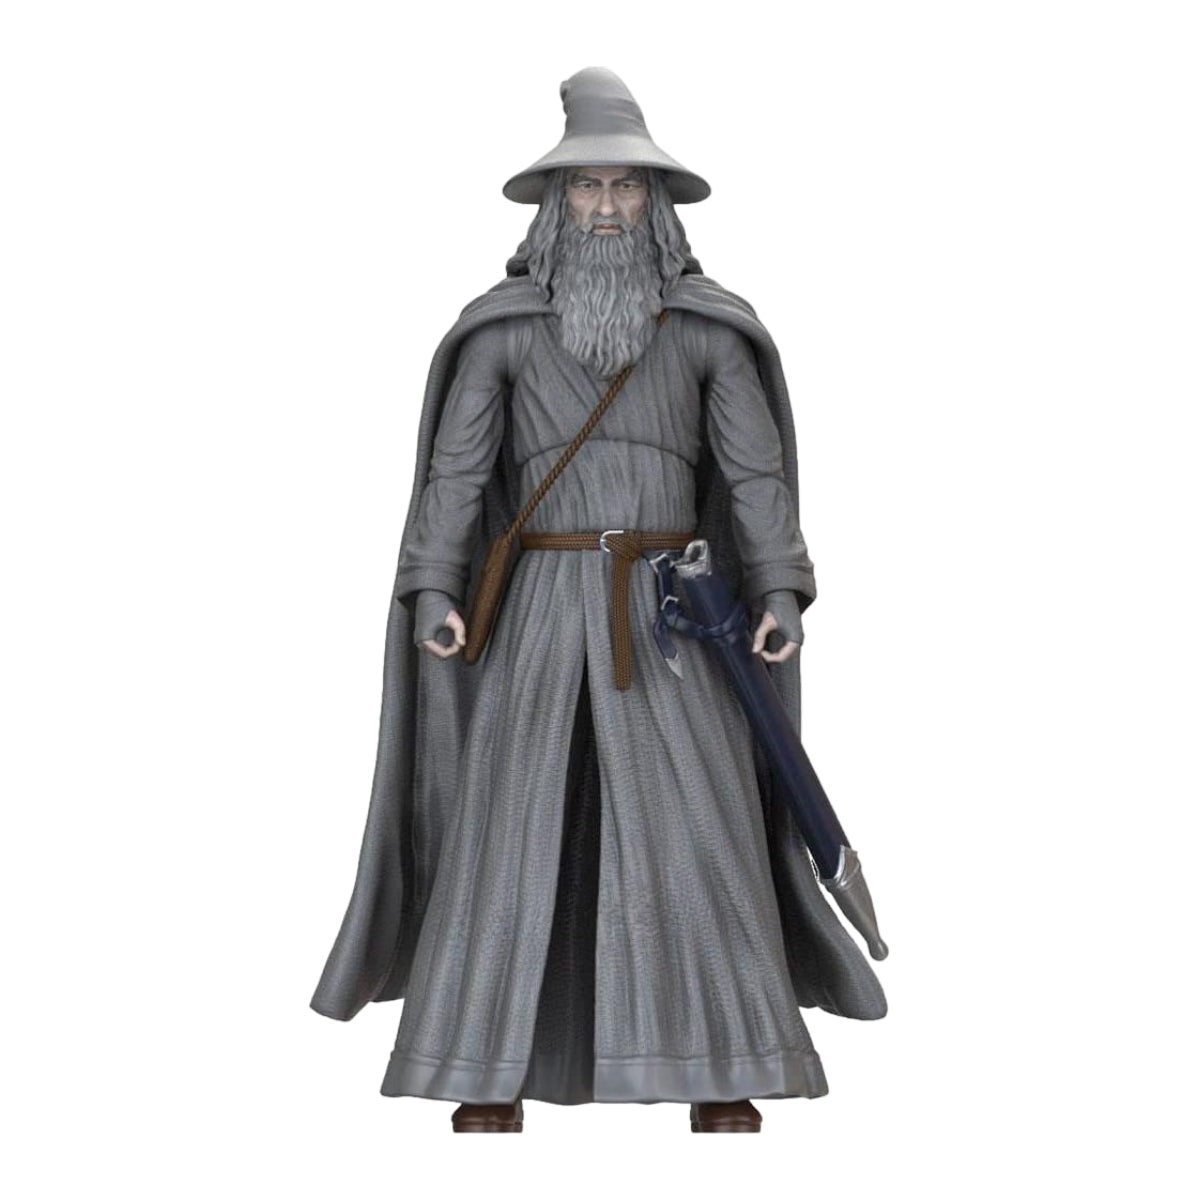 BST AXN LORD OF THE RINGS GANDALF THE GREY